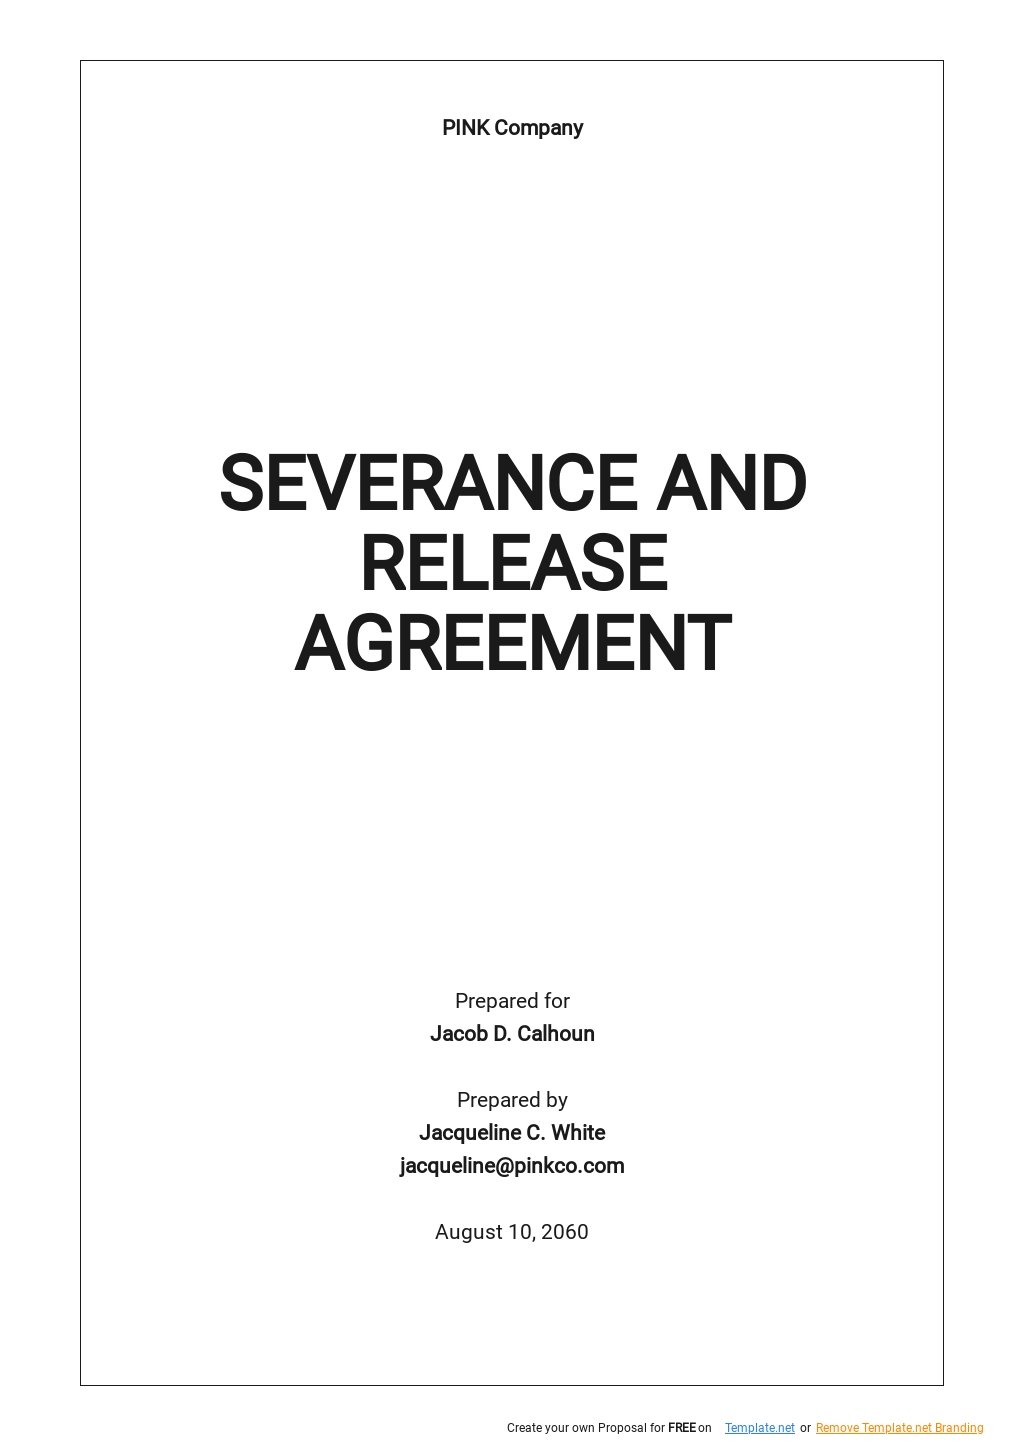 Severance and Release Agreement Template .jpe